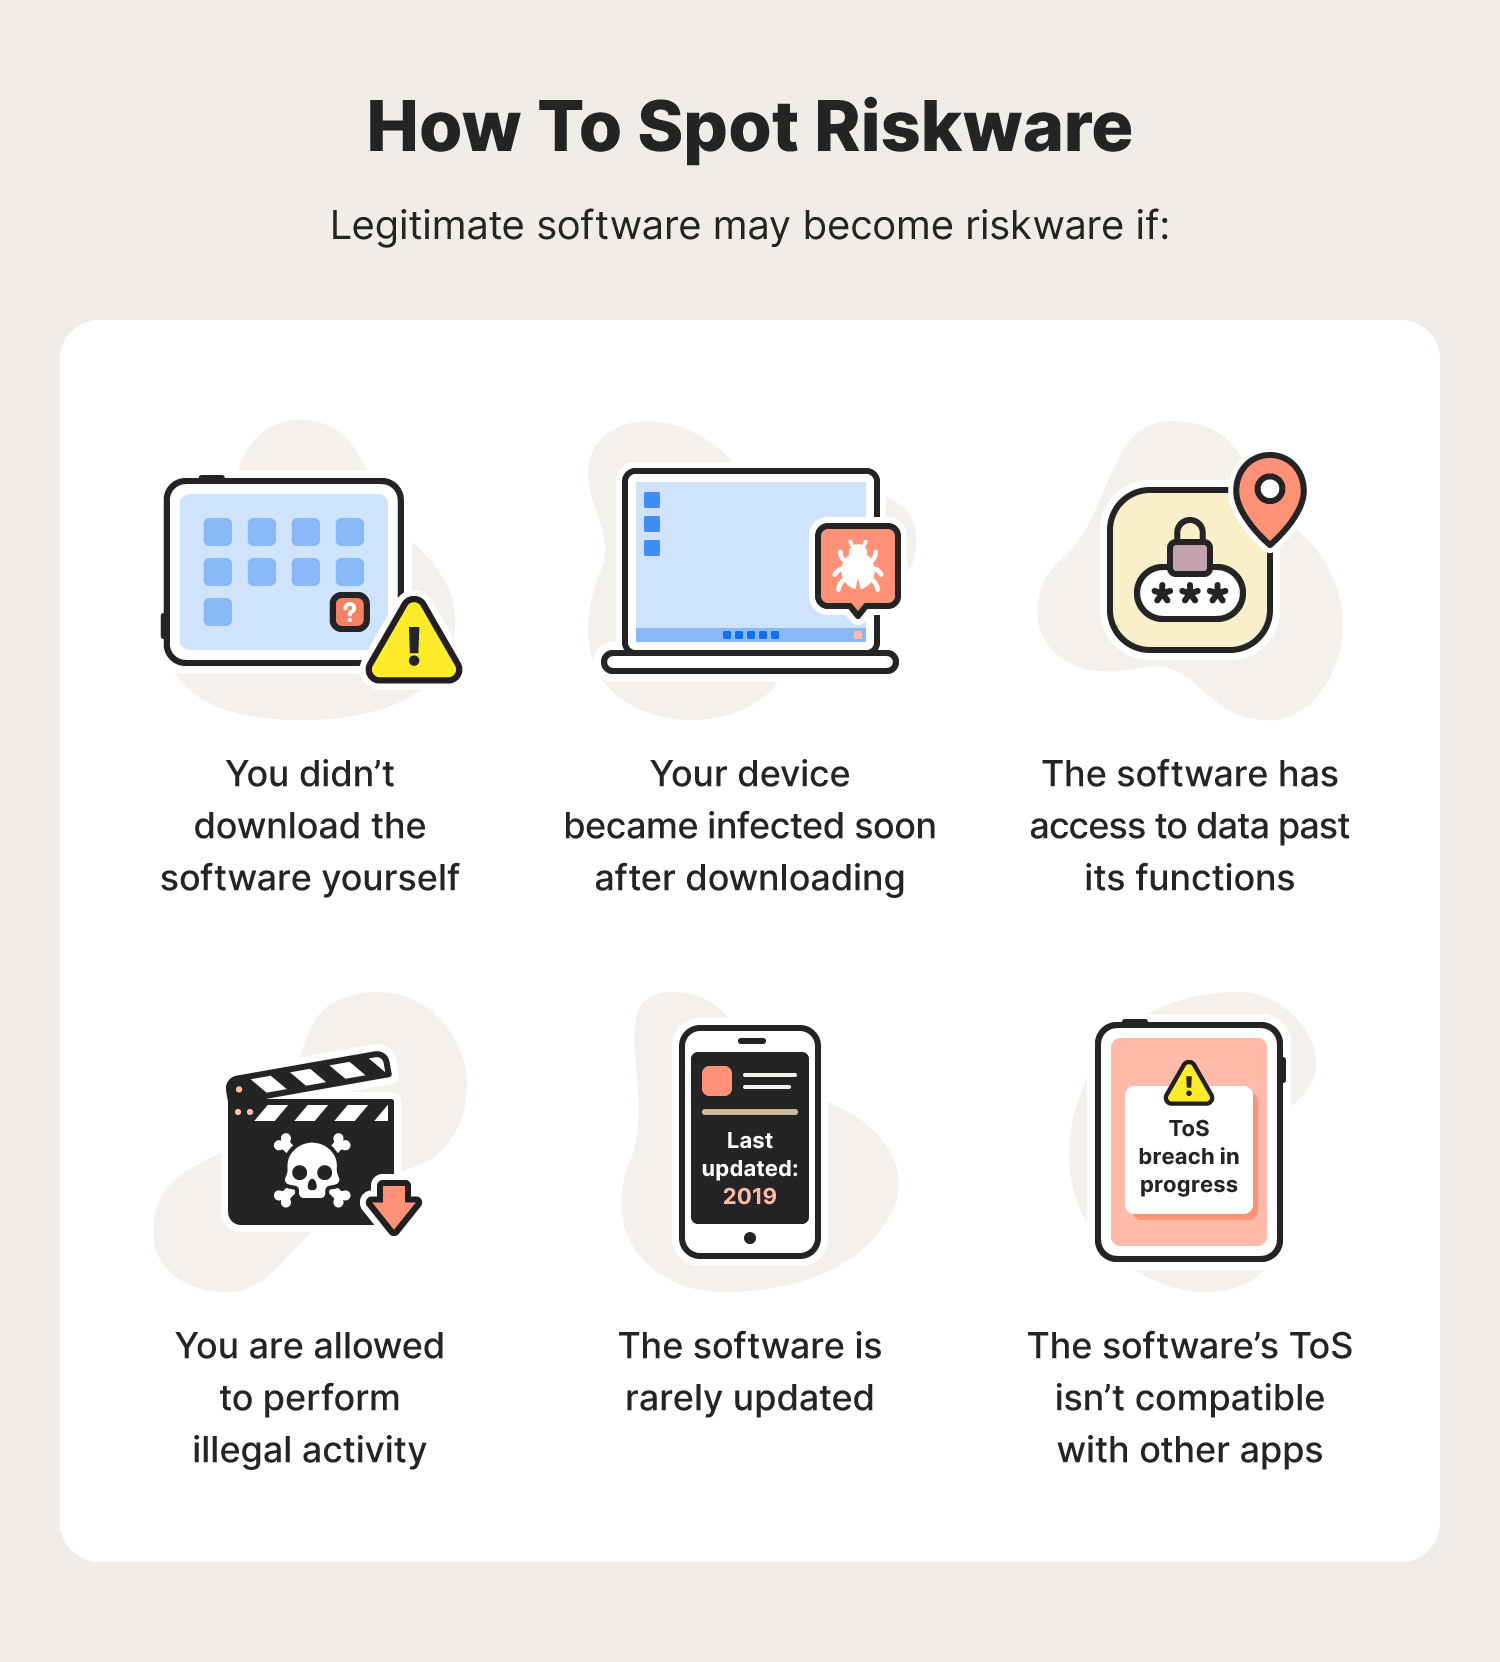 A graphic showcases six signs that legitimate software has become riskware.